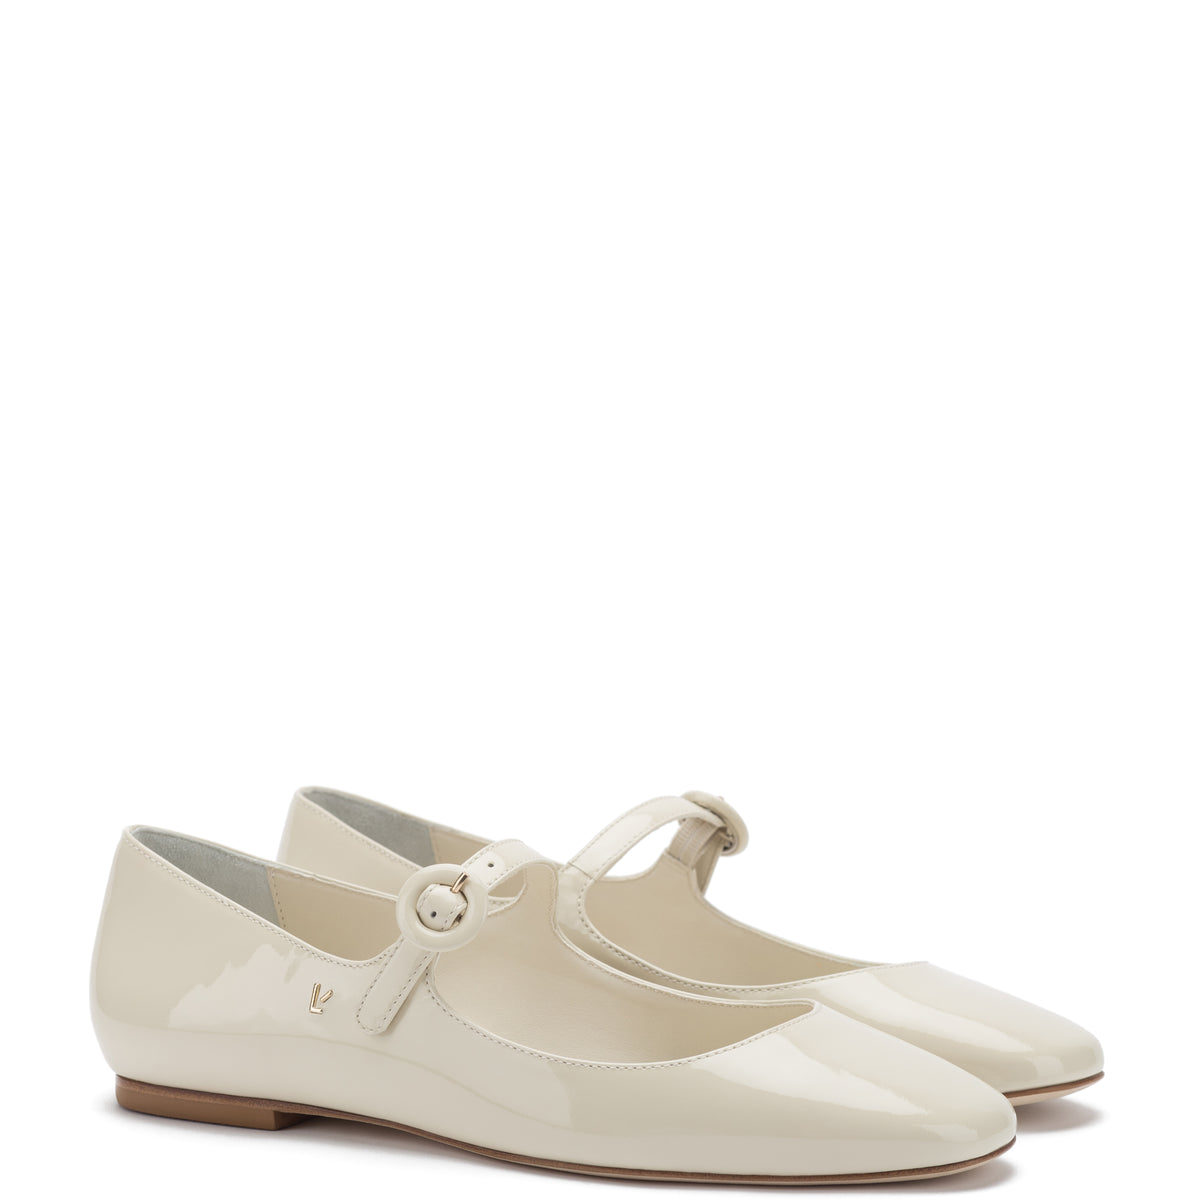 Blair Ballet Flat In Ivory Patent Leather